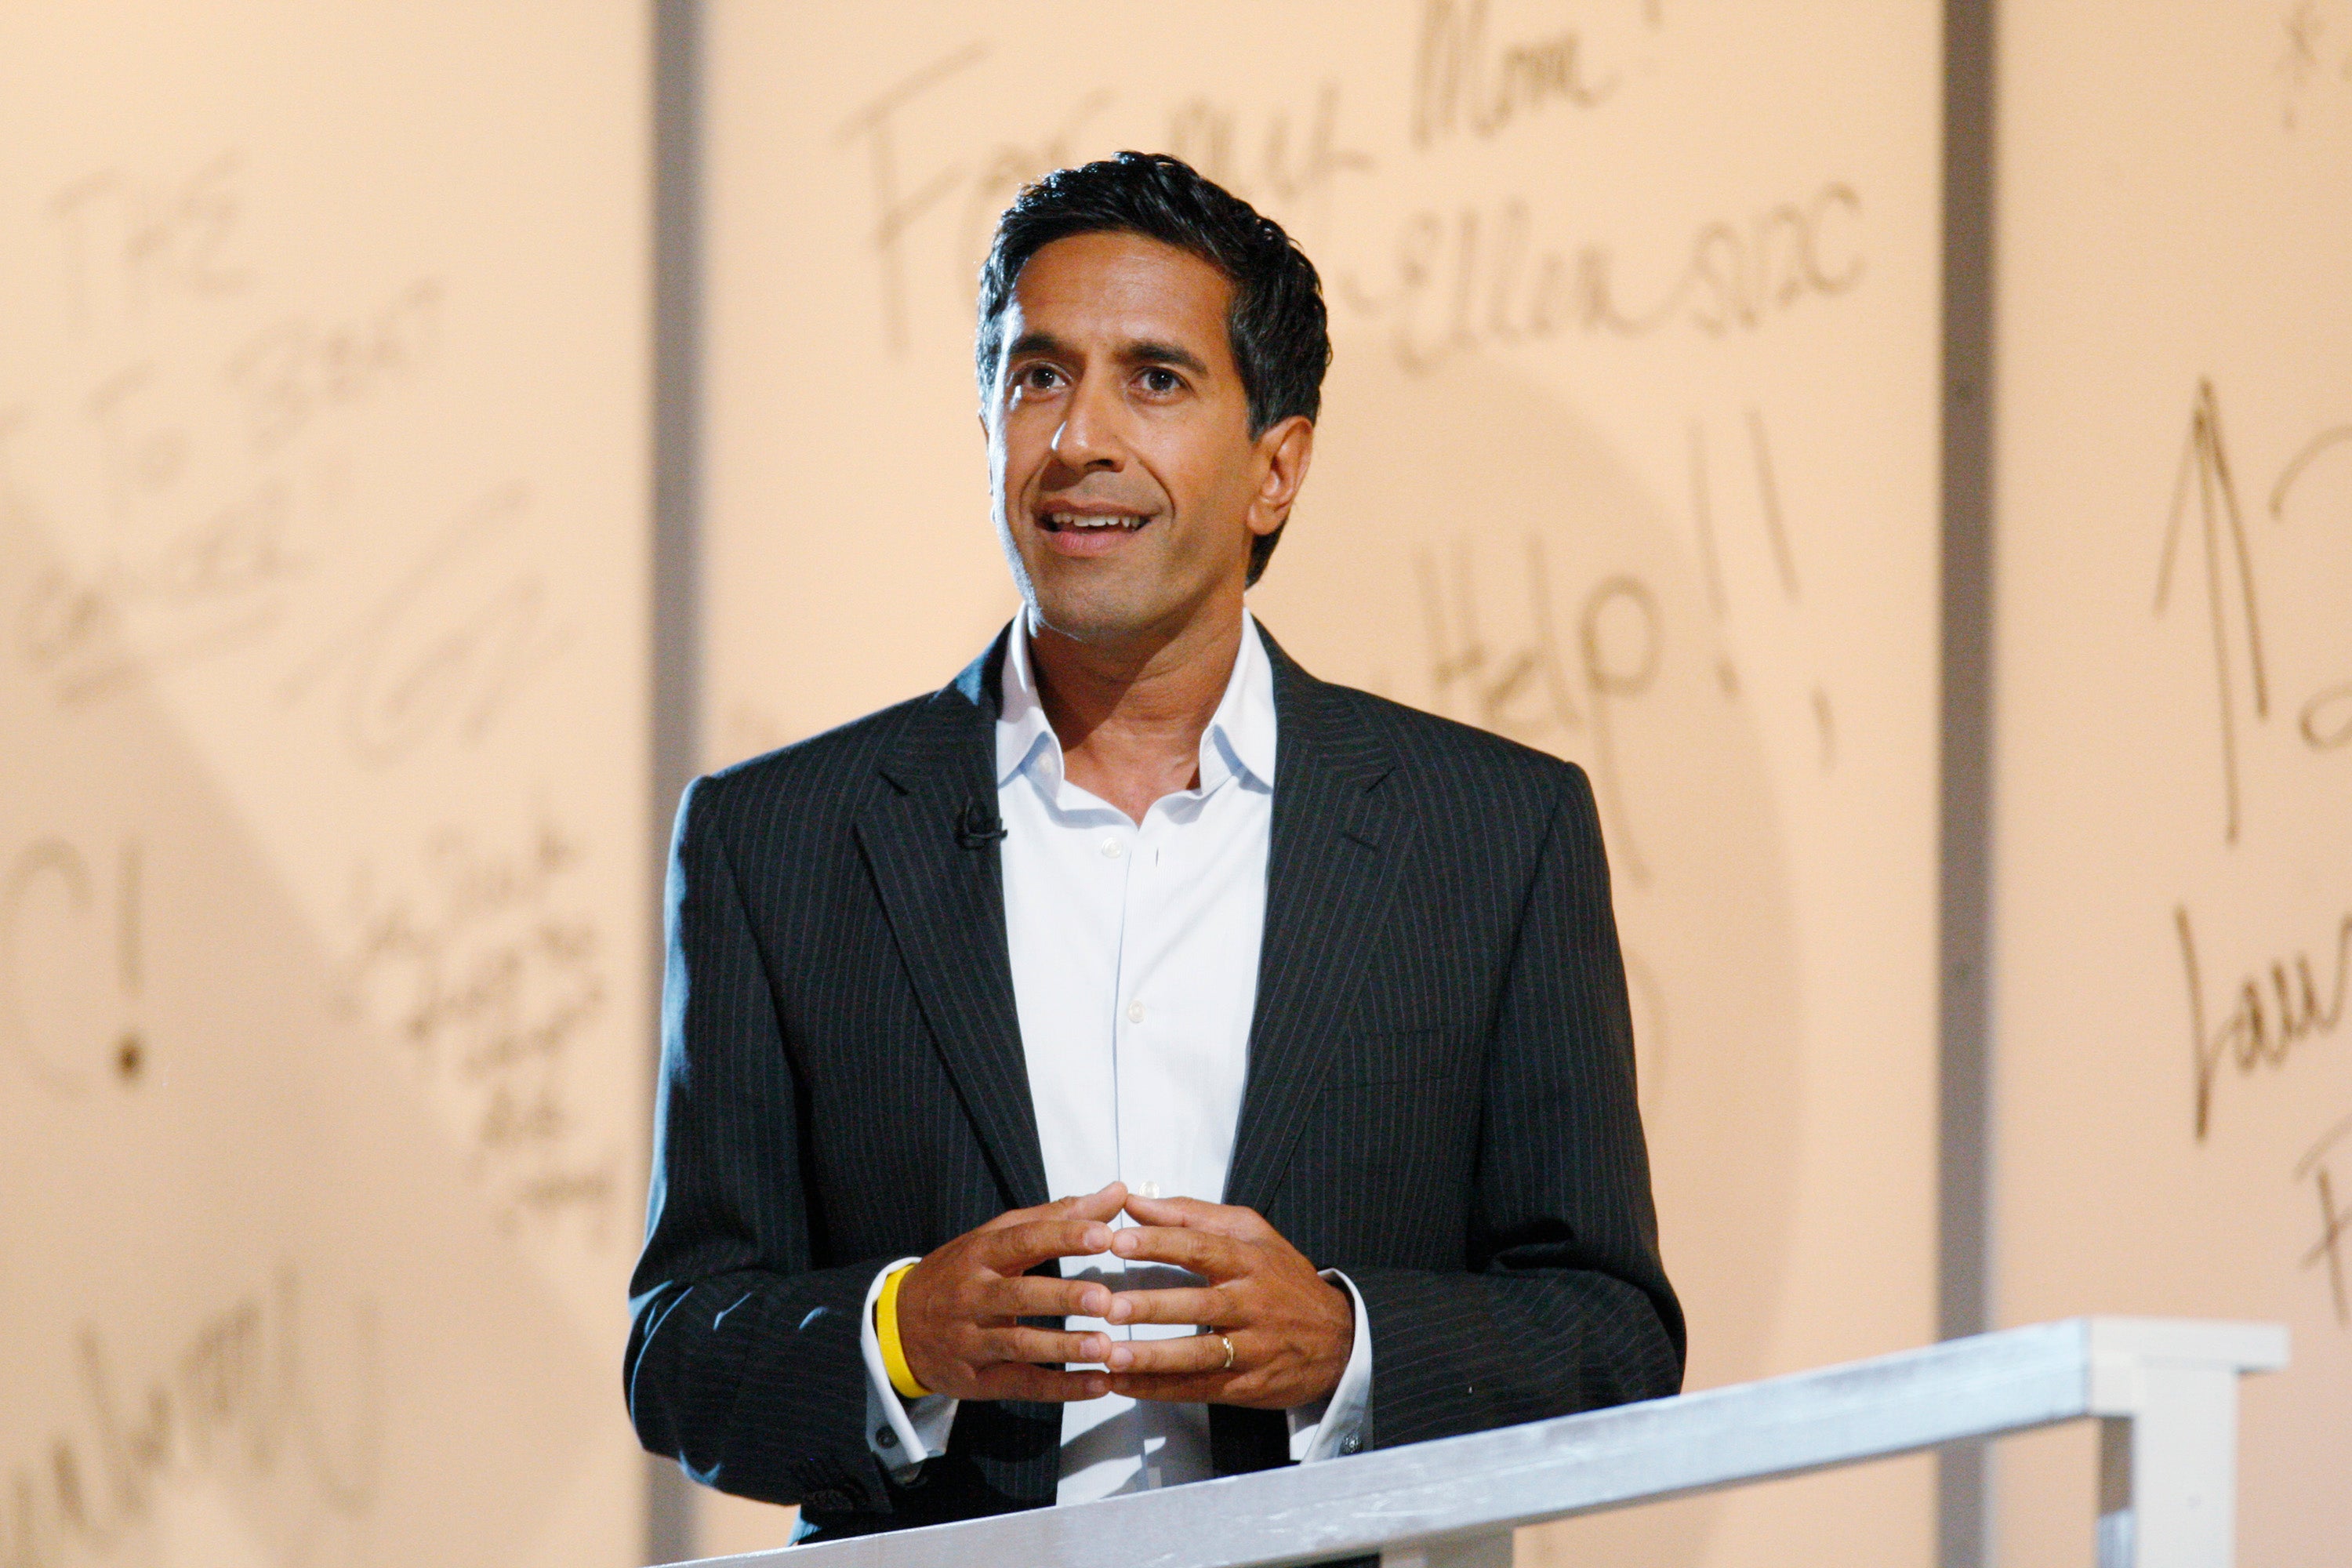 Dr Sanjay Gupta, CNN’s Chief Medical Correspondent, has written a book about five activities to stay mentally sharper